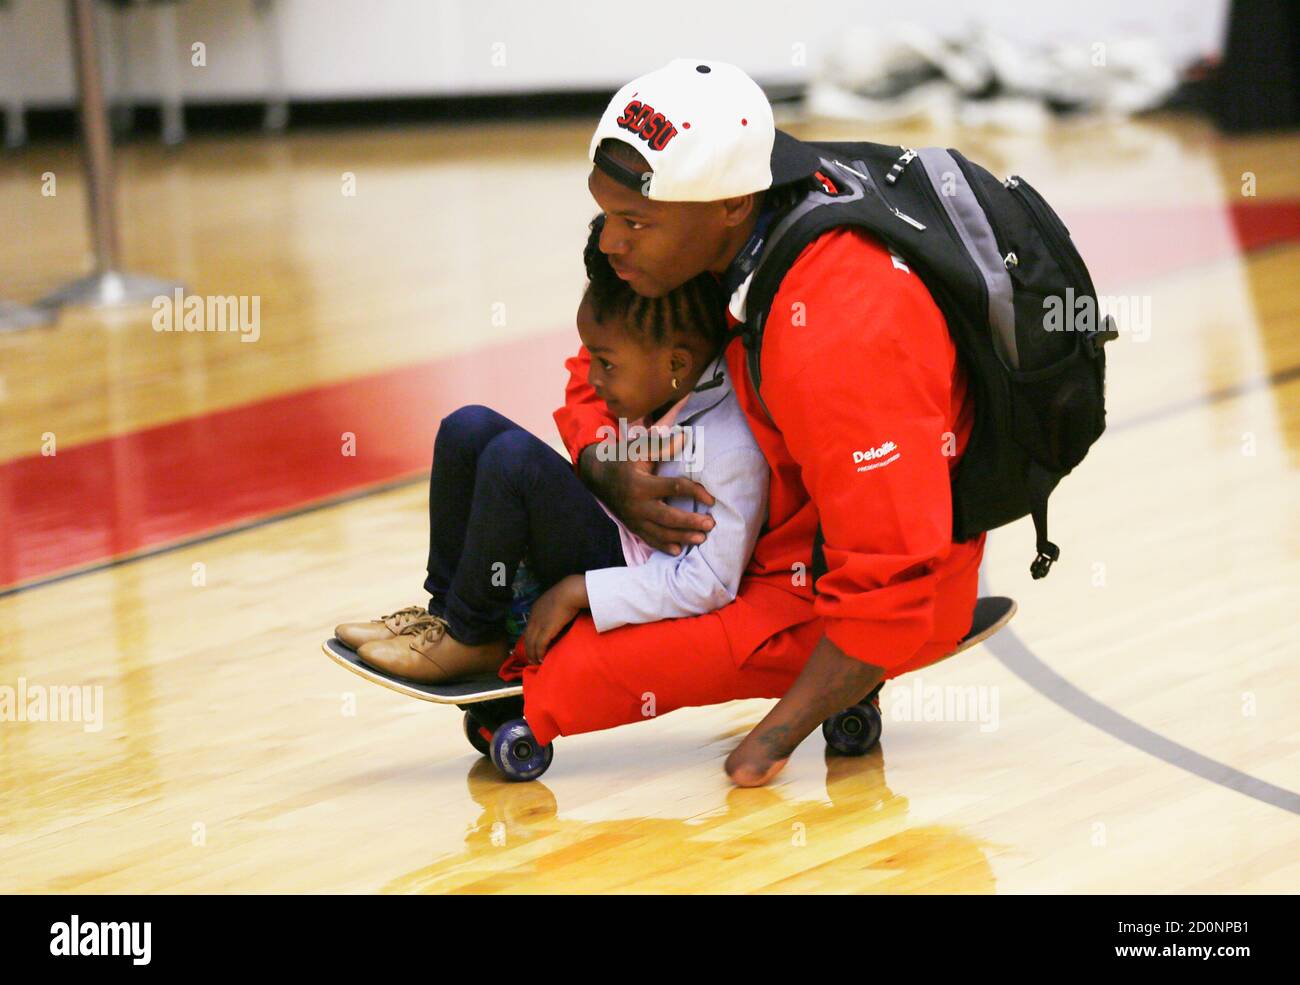 U.S. Marine Corps Sergeant Anthony McDaniel takes his daughter Dejah for a ride on his skateboard at the Warrior Games at the U.S. Olympic Training Center in Colorado Springs, Colorado May 11, 2013. McDaniel, who lost both legs and his left hand after stepping on an IED while serving in Afghanistan, will be competing in wheelchair basketball and track at the event. He recently decided the skateboard is sometimes easier to use to get around than a wheelchair. The Warrior Games is a Paralympic-style competition featuring injured servicemen and women from the U.S., United Kingdom, Canada and Aust Stock Photo